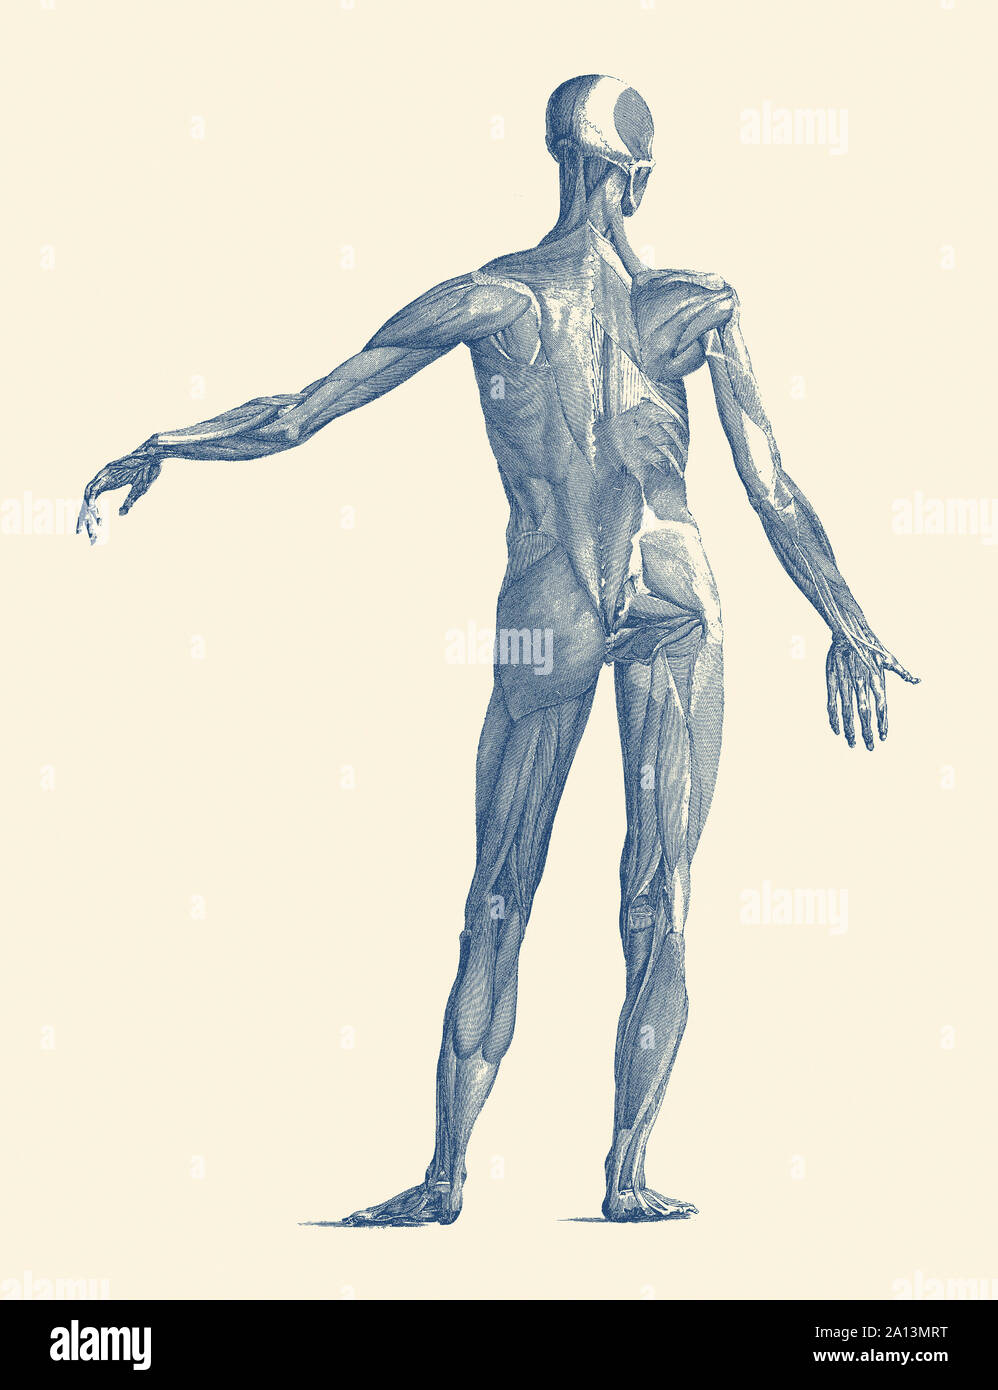 Vintage anatomy print showing a back view of the human muscular system. Stock Photo